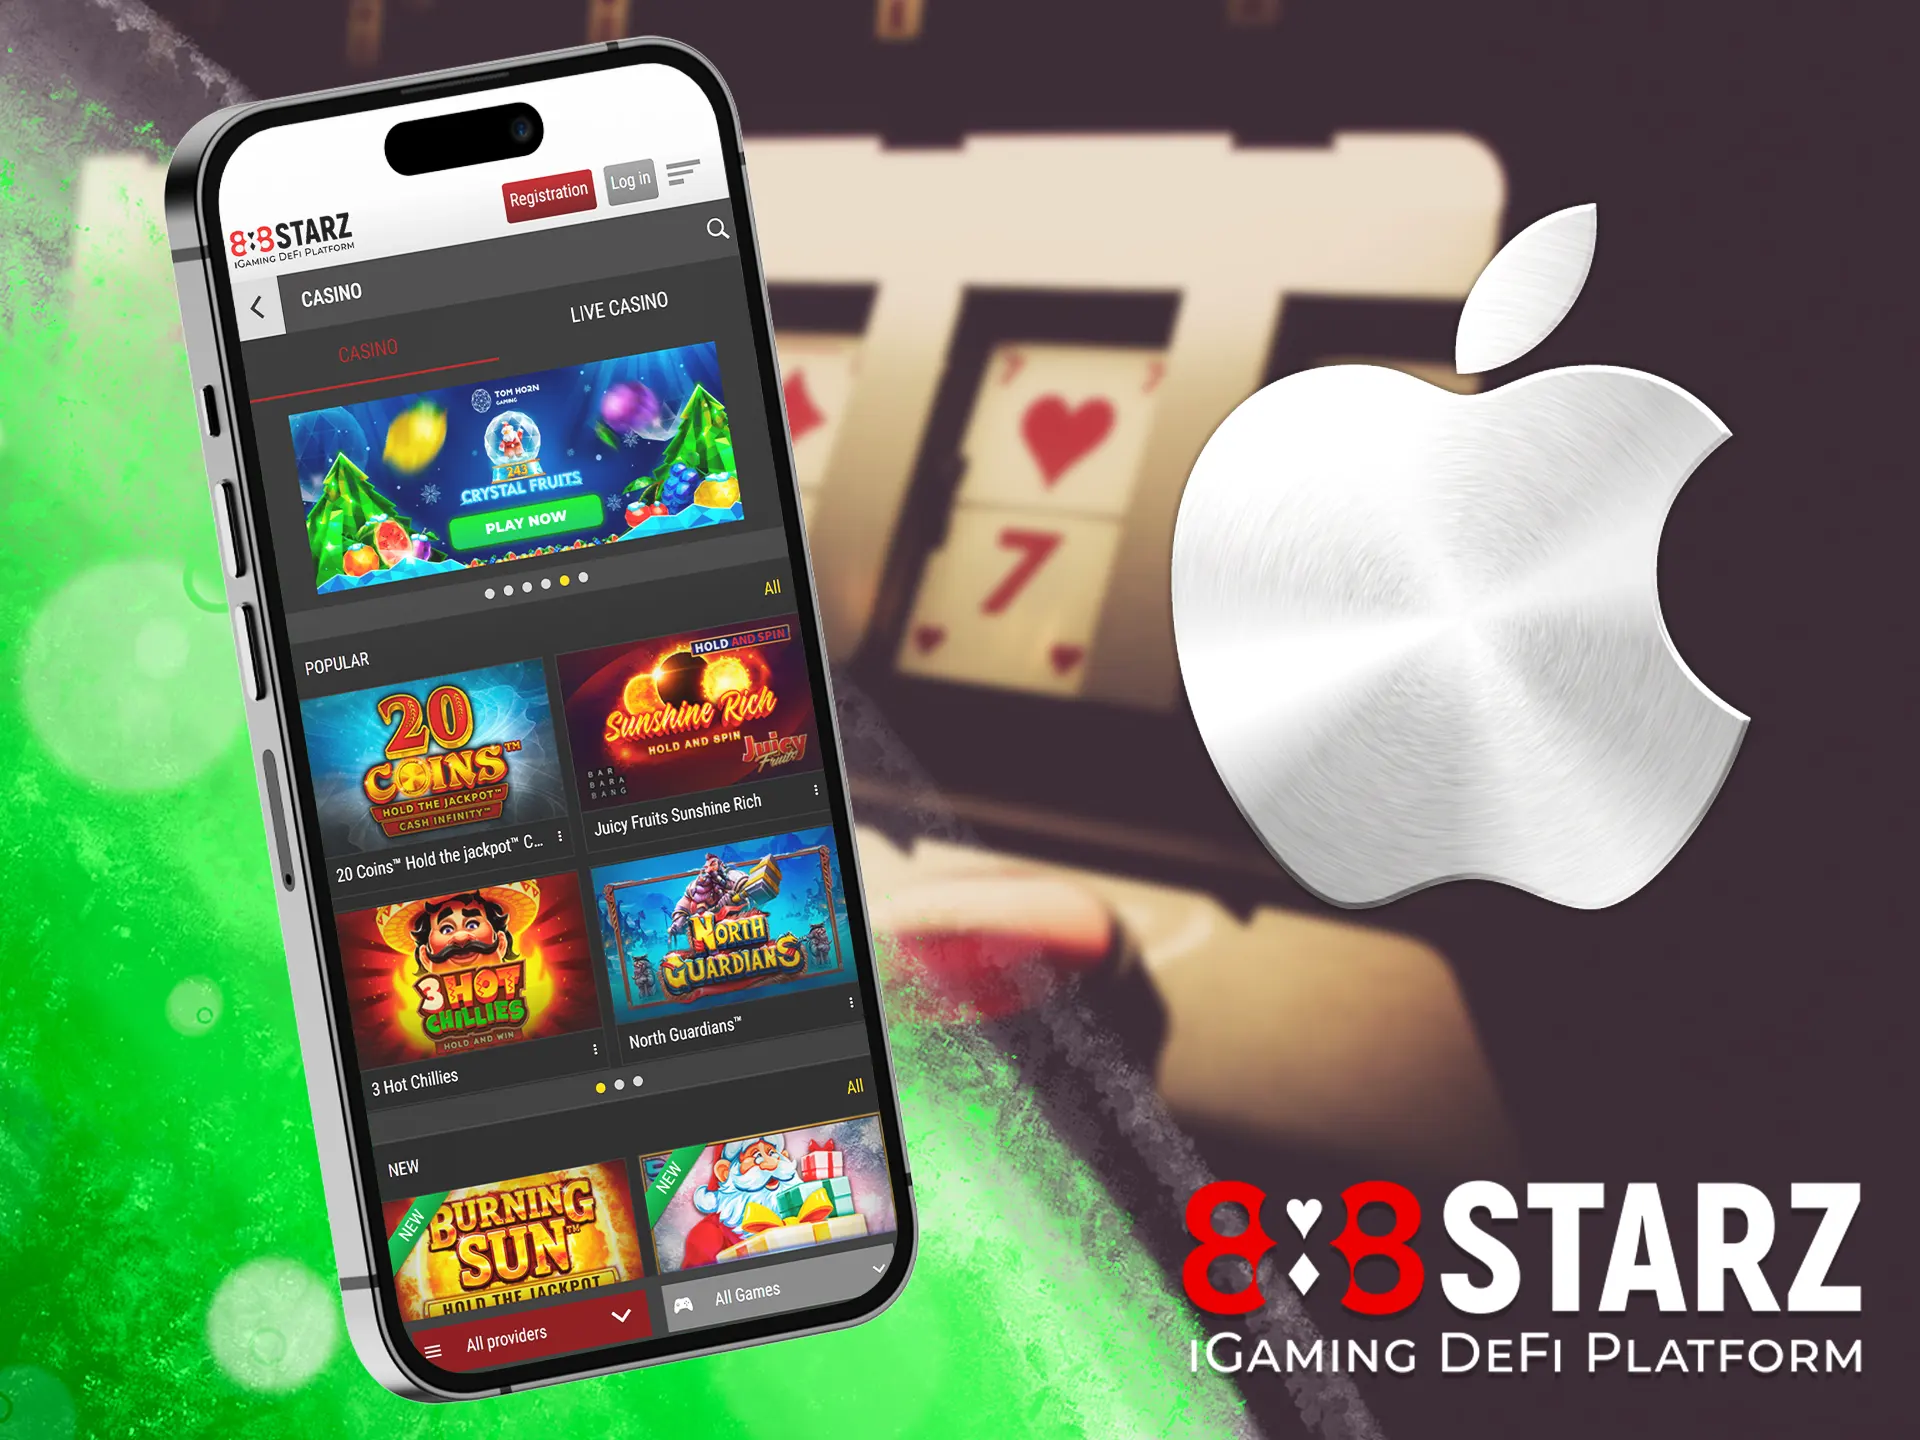 The 888starz software for Apple provides an enjoyable experience for players, similar to the Android platform, and also runs faster.